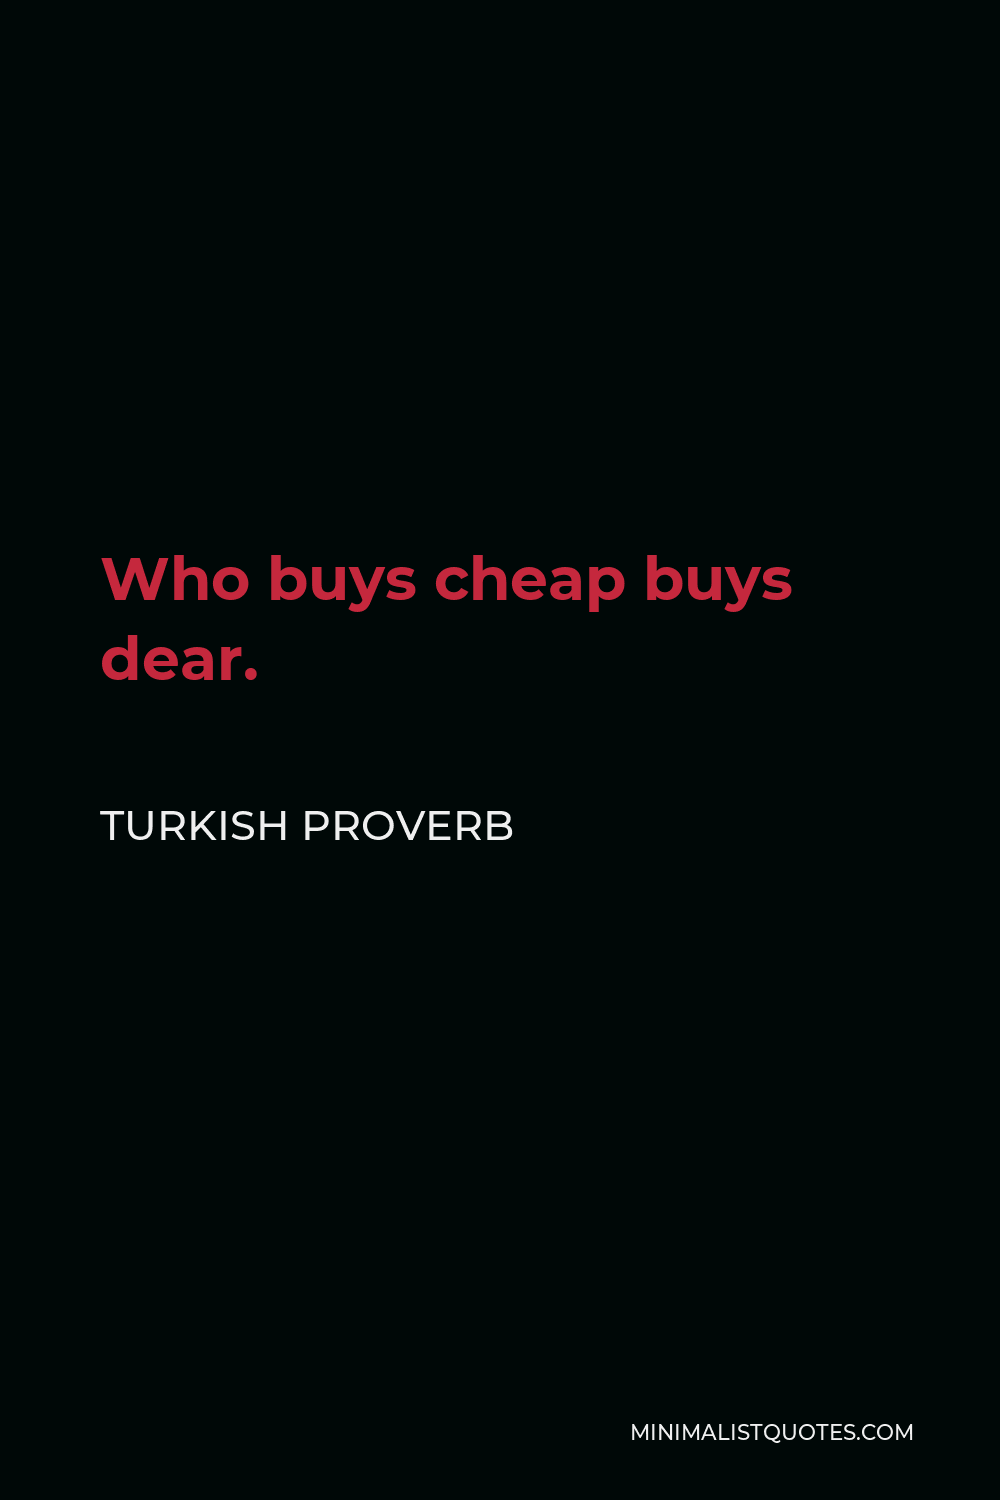 Turkish Proverb Quote - Who buys cheap buys dear.